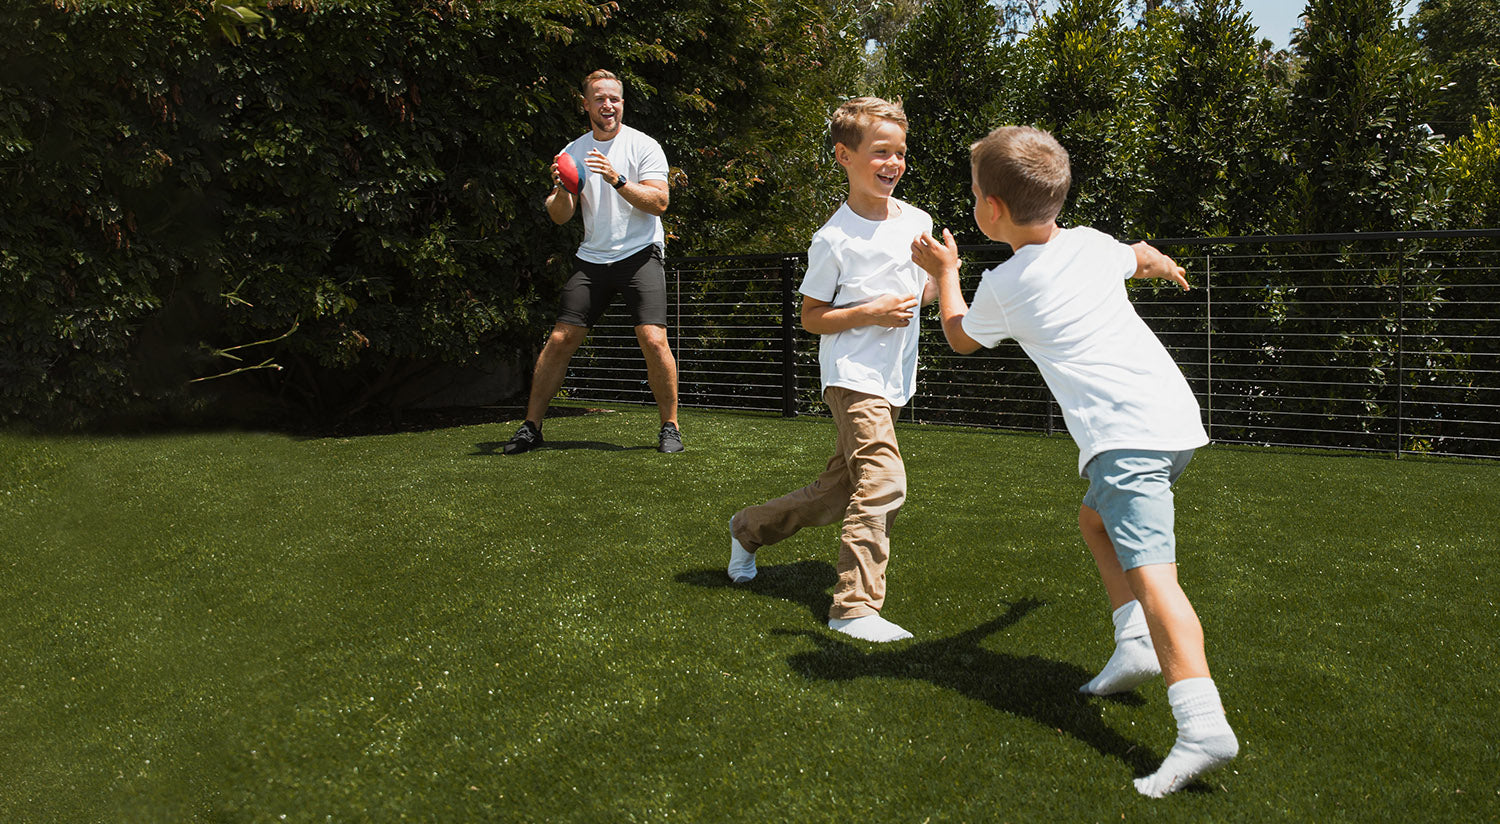 Man playing football with 2 boys